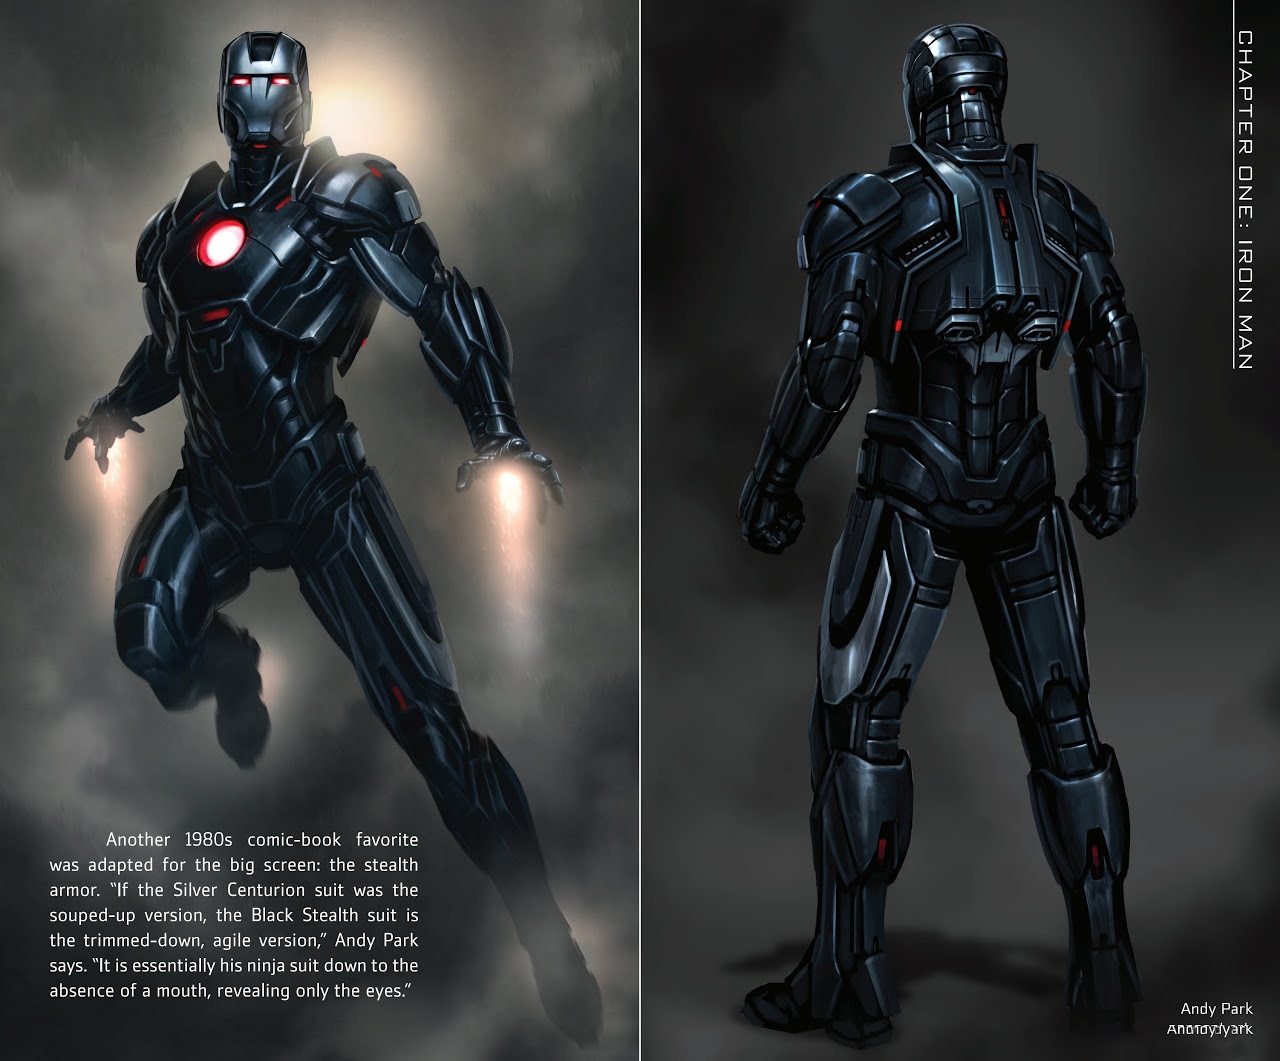 The Road to Marvel's Avengers Age of Ultron - The Art of the Marvel Cinematic Universe 71